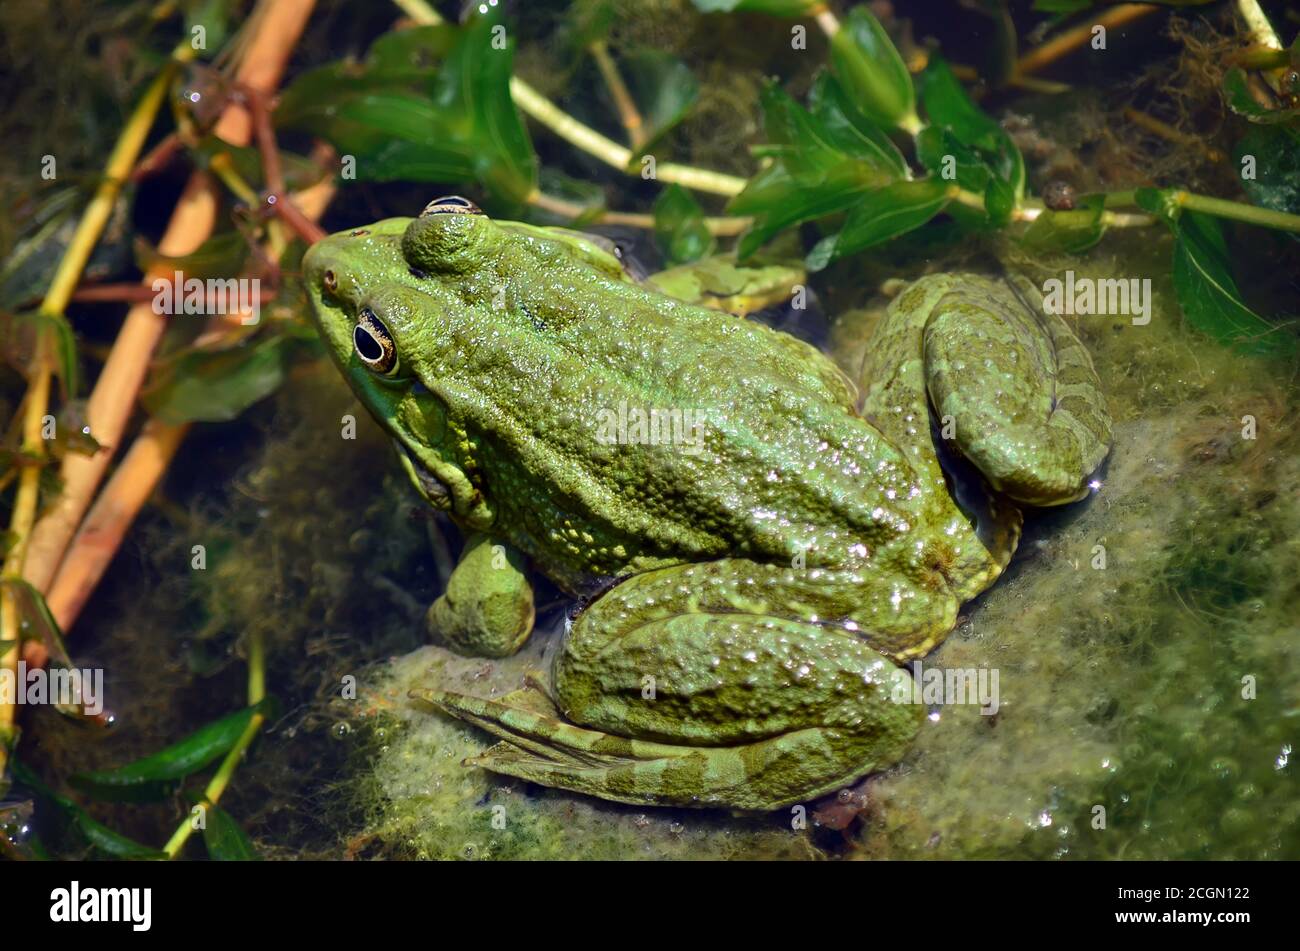 Green frog in a pond in its natural habitat. Fauna of Ukraine. Shallow depth of field, close-up. Stock Photo